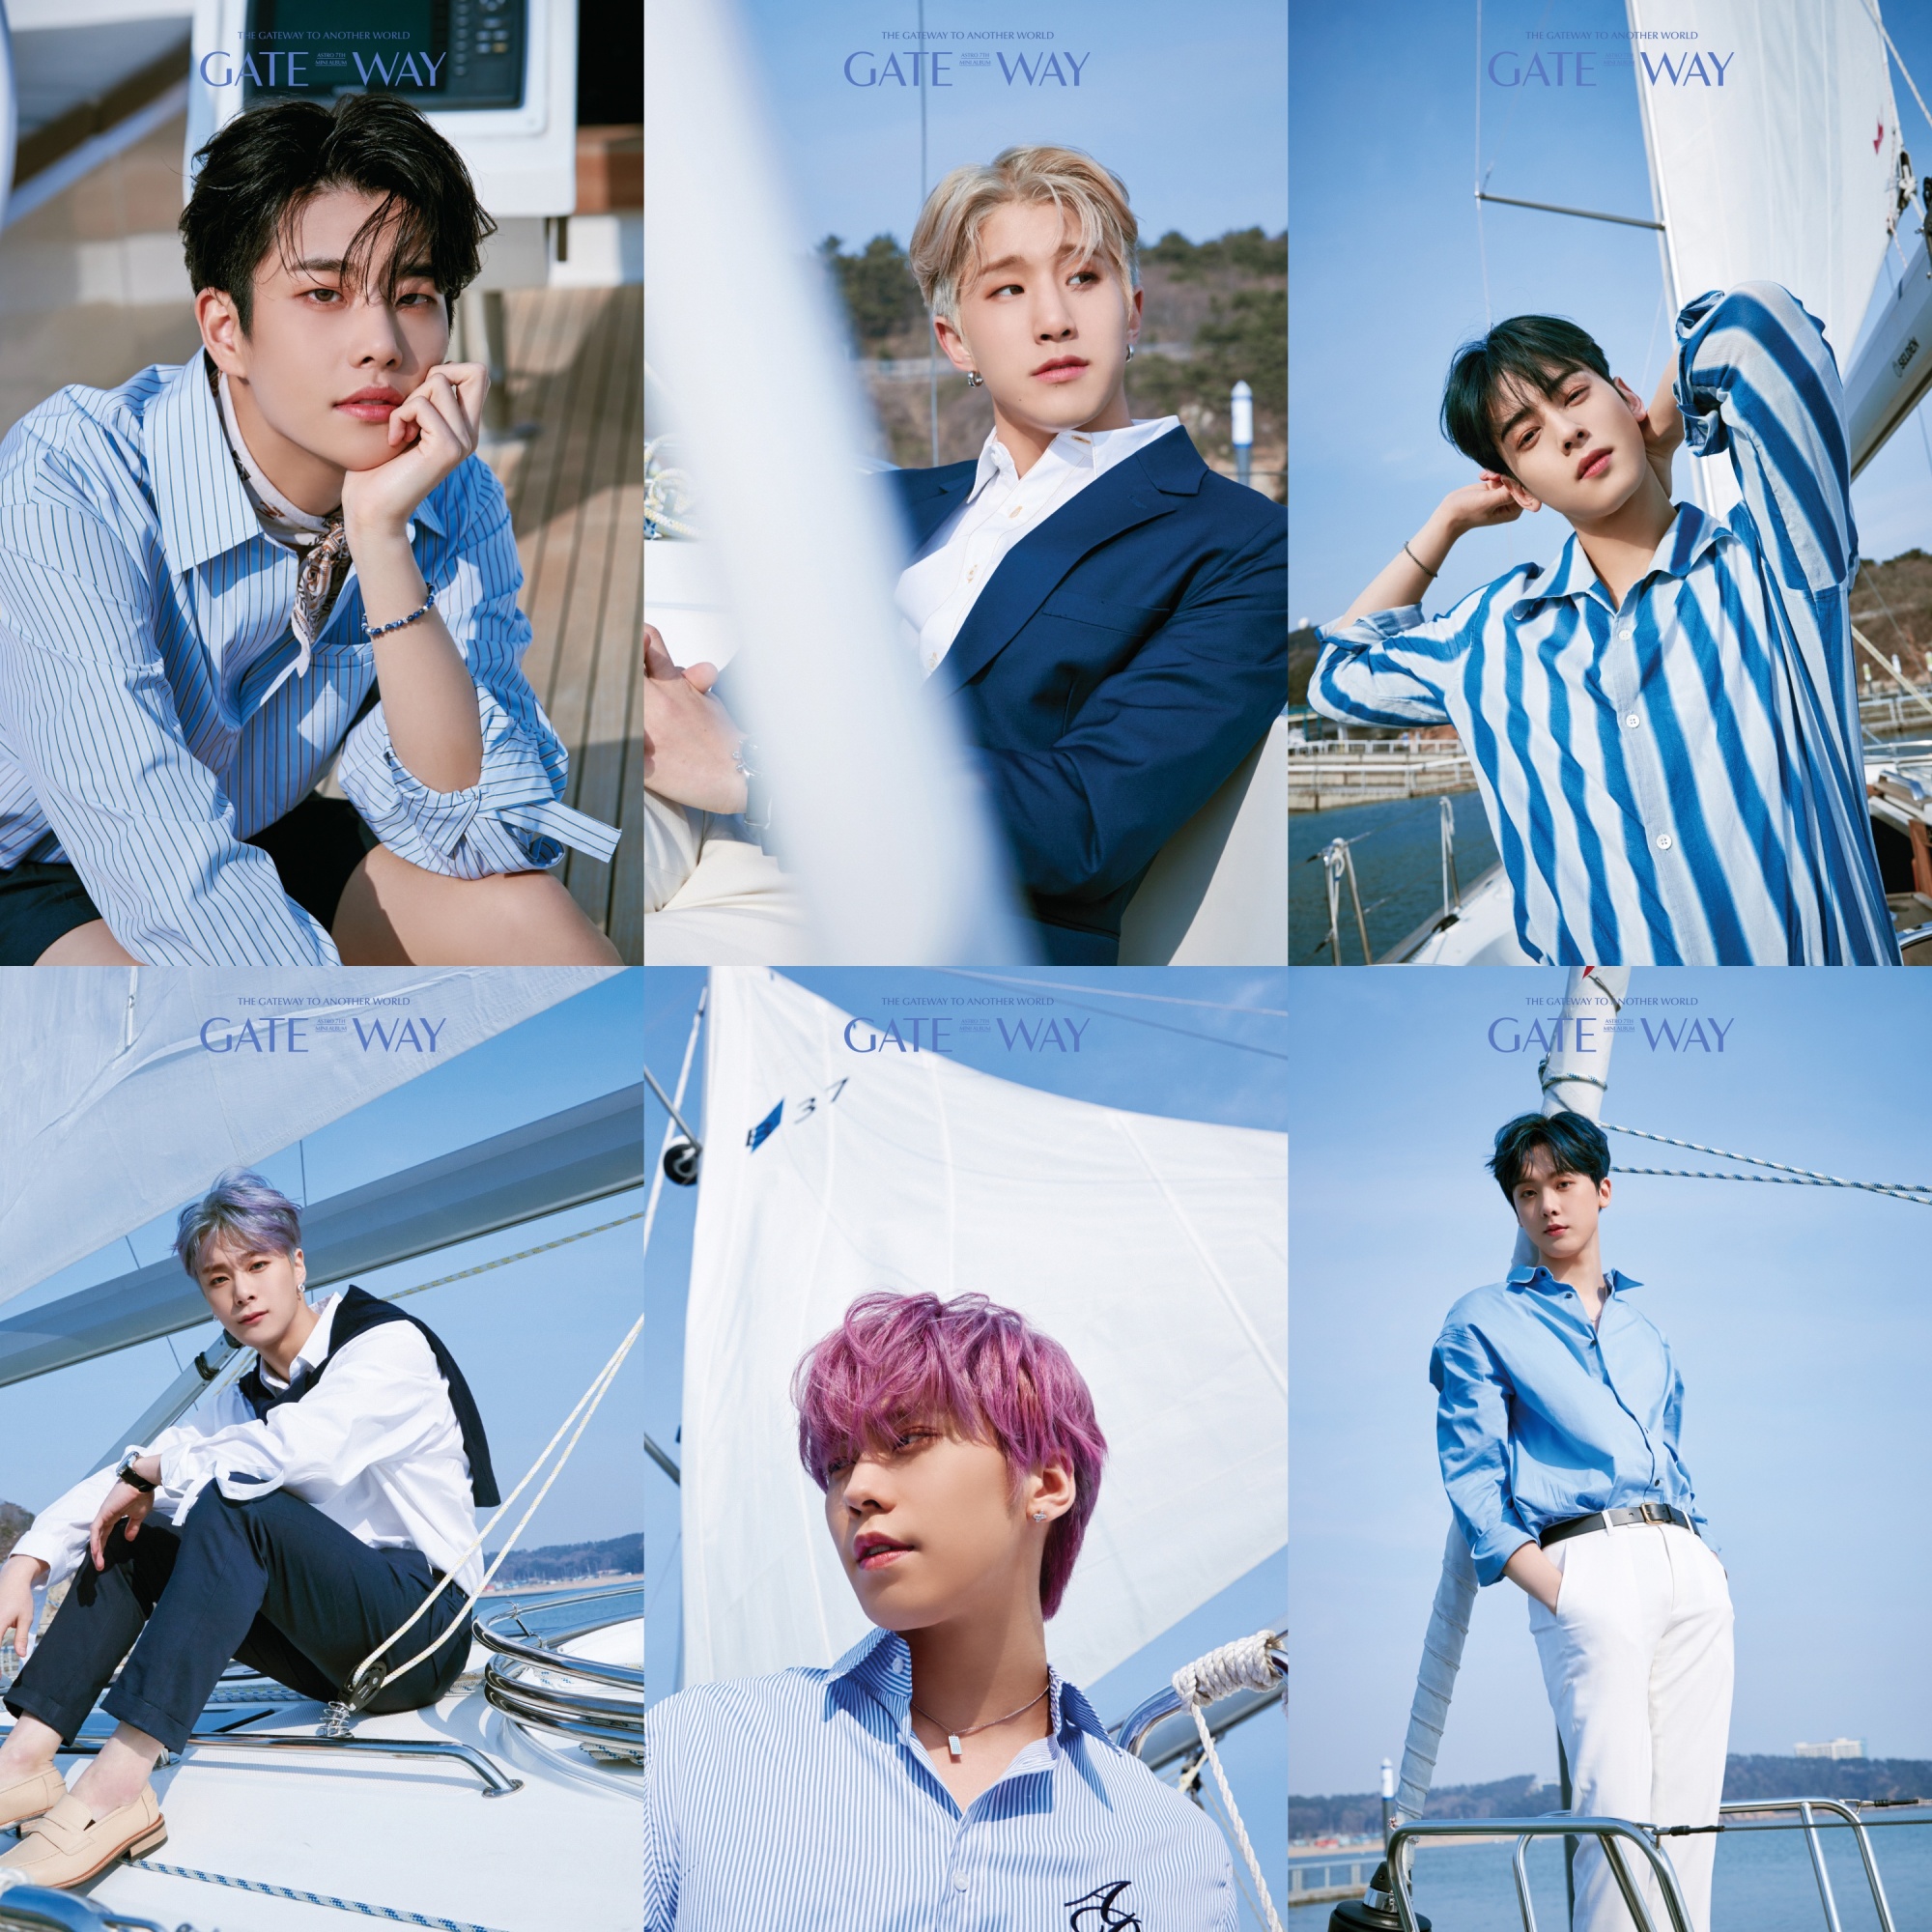 Astro (ASTRO) captivated Sight at once with its unique refreshing beauty.Astro in the official photo ANOTHER WORLD (Anader World) version of the seventh mini album GATEWAY (gateway) published on the official SNS channel of Astro (MJ, Chen Zhen, Cha Eun-woo, Moon Bin, Rocky, Yoon San-ha) is itself a clean.Astro, a costume with a white and blue color, creates a cool atmosphere that seems to sail on a yacht at any moment.Especially, Astro, which lightly spreads its head as if it feels the wind in the background of a picture-like blue sky and the sea, feels luxurious refreshment.In addition, it has completed a more refreshing Astro in contrast to the previously released TIME TRAVELER concept.Above all, Farm Synergy, which is created by six Astro members, raises expectations for this album GATEWAY, which predicts Power refreshment.In addition, Astro has shown both desolation of the desert and cleanness of the sea through official photo, so I am curious about the story to be included in the album.Meanwhile, Astros seventh mini album GATEWAY will be released at 6 pm on May 4th as an album that can fully feel the charm of Power refreshment of Absolute Icon Astro.iMBC  Photo Fantasy O Music